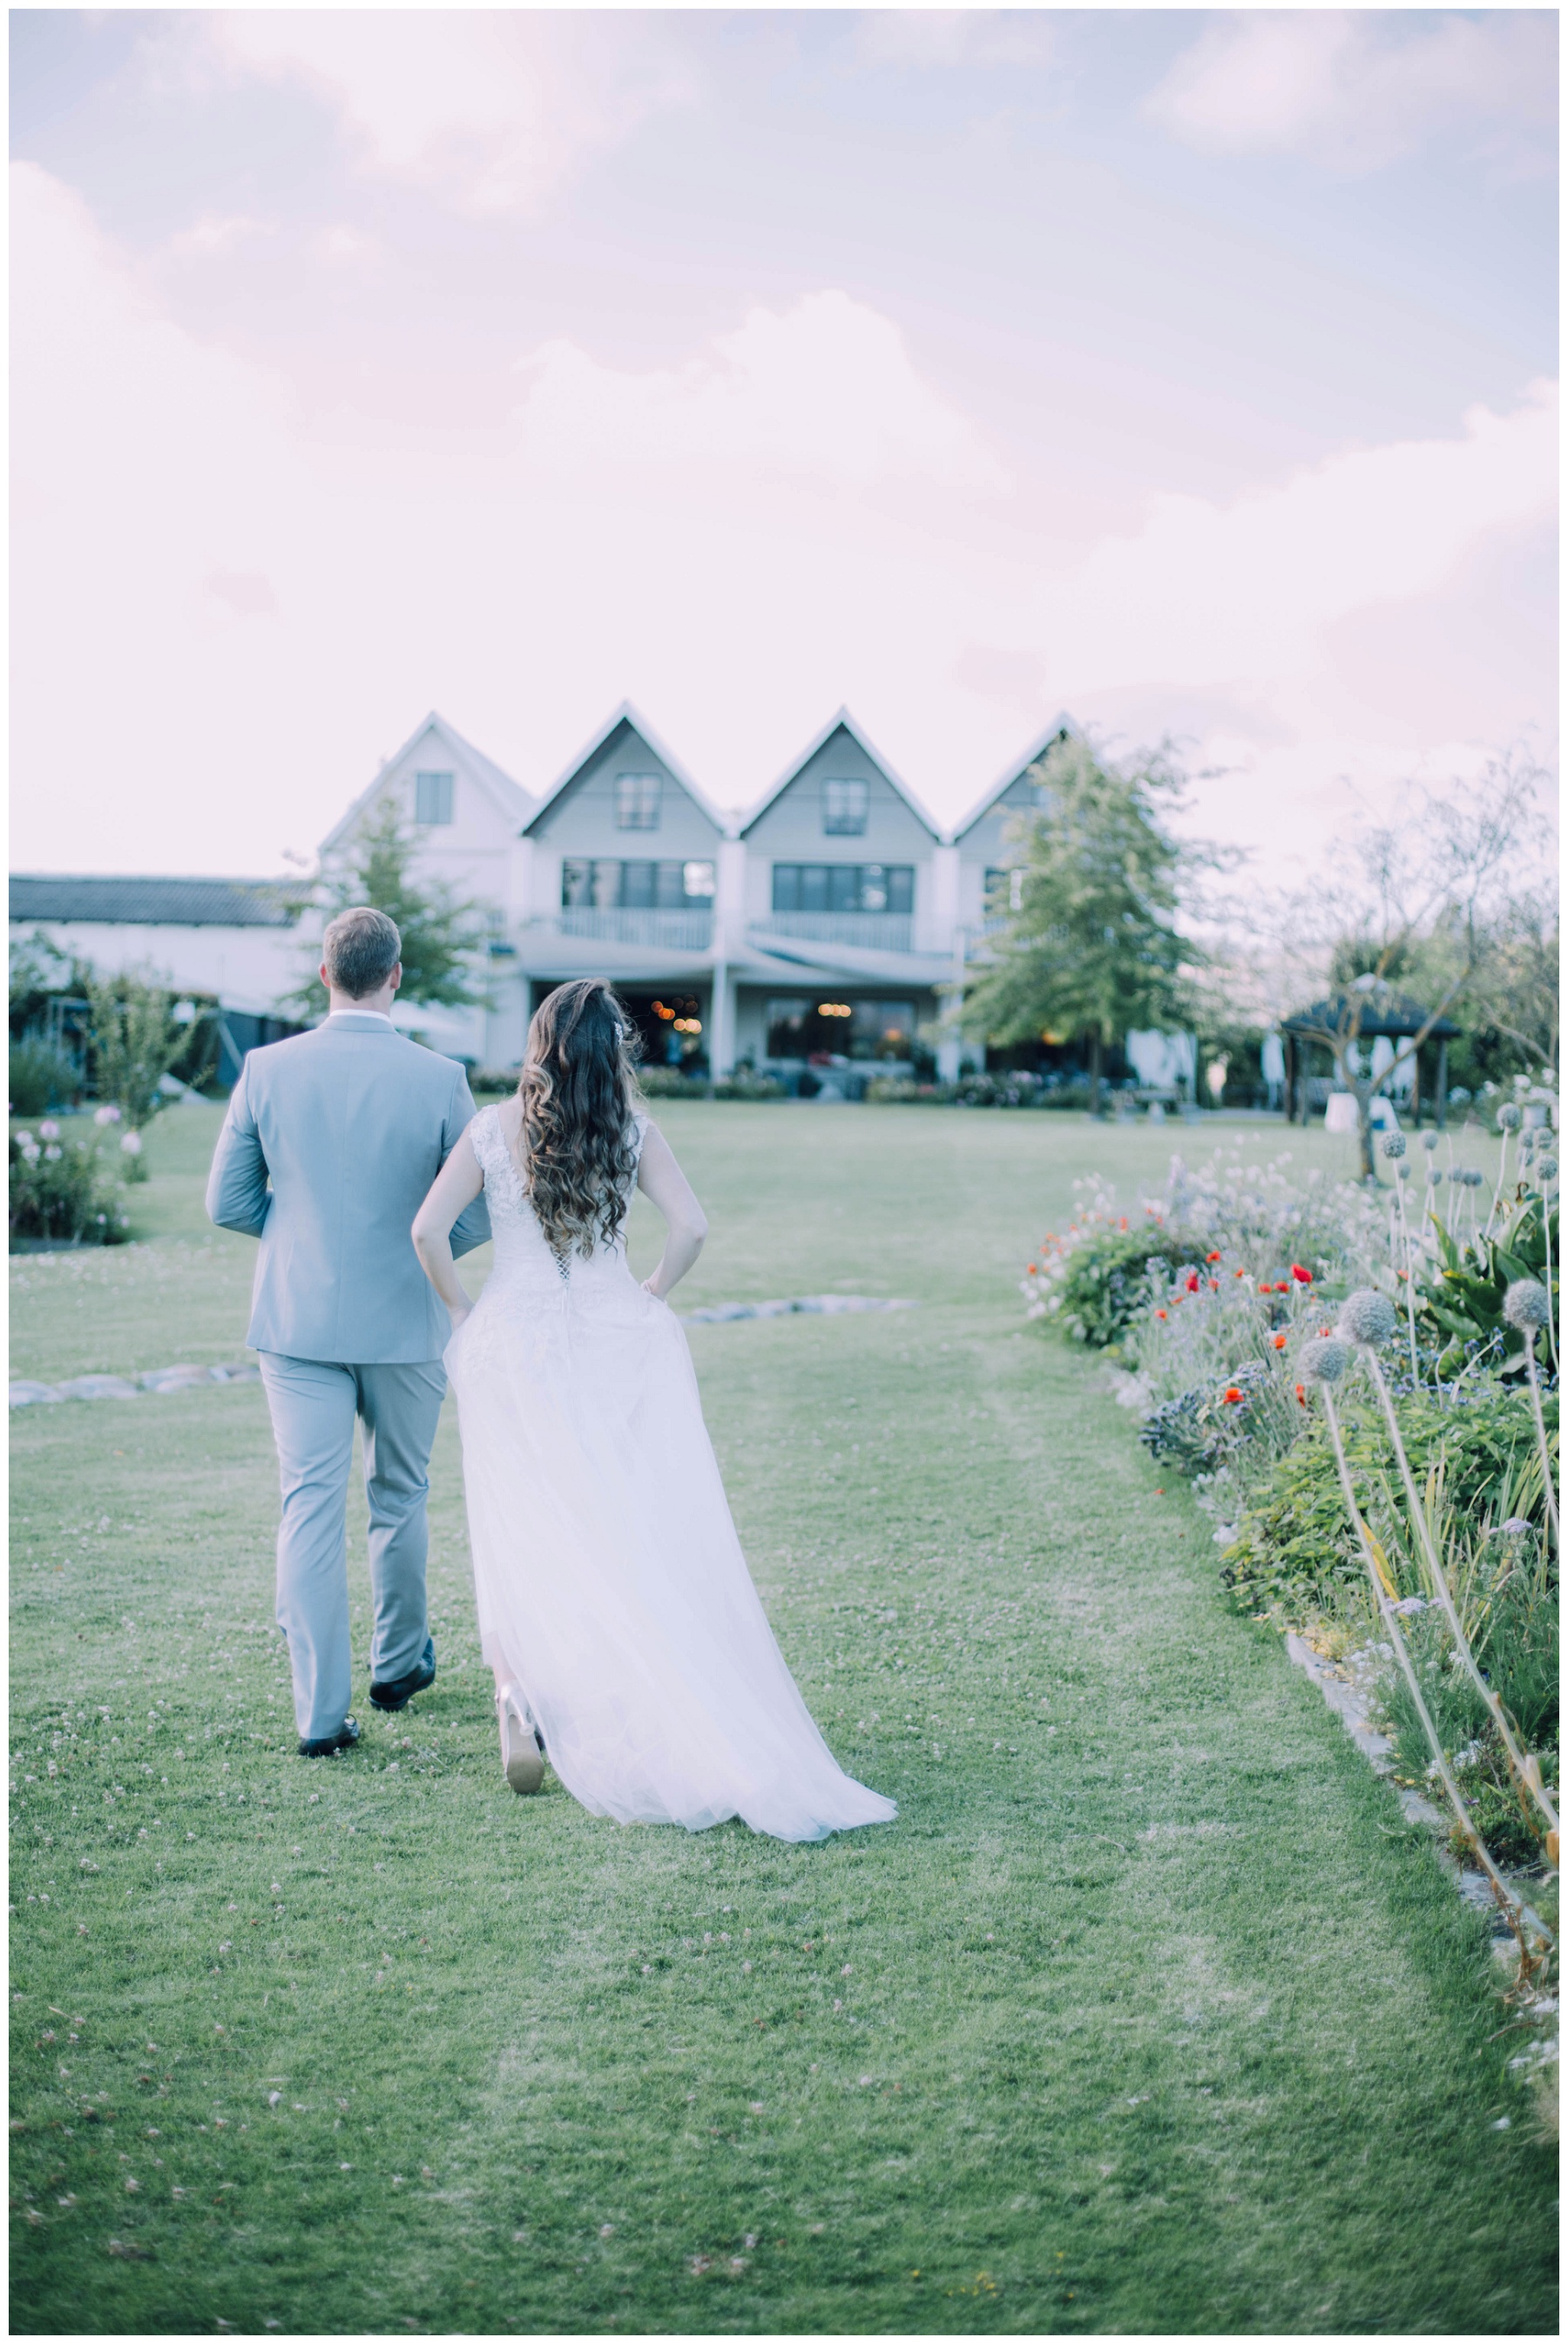 Ronel Kruger Cape Town Wedding and Lifestyle Photographer_8844.jpg